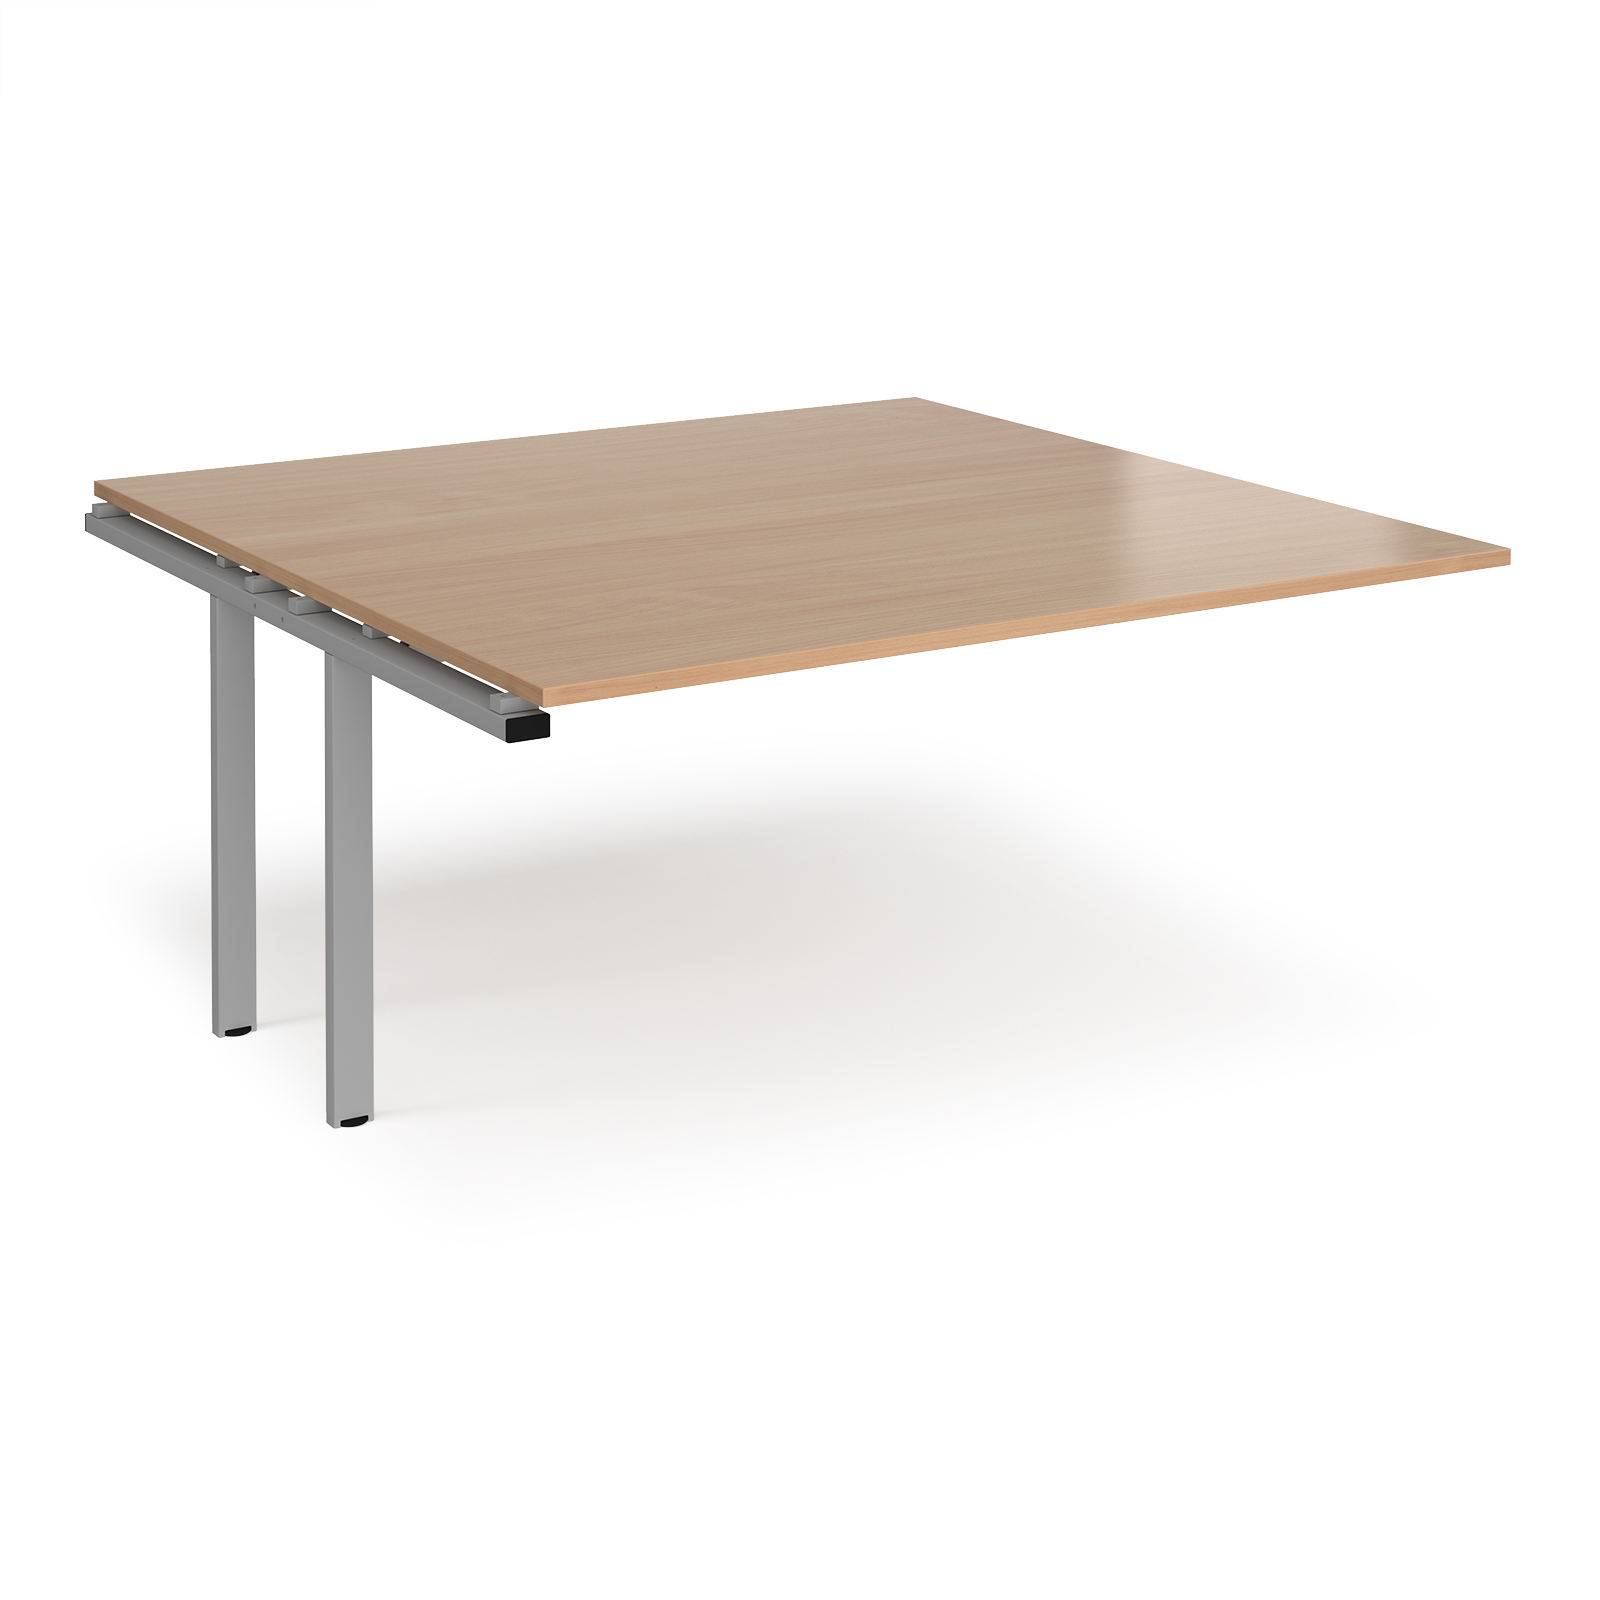 Adapt boardroom table add on unit 1600mm x 1600mm - silver frame, beech top